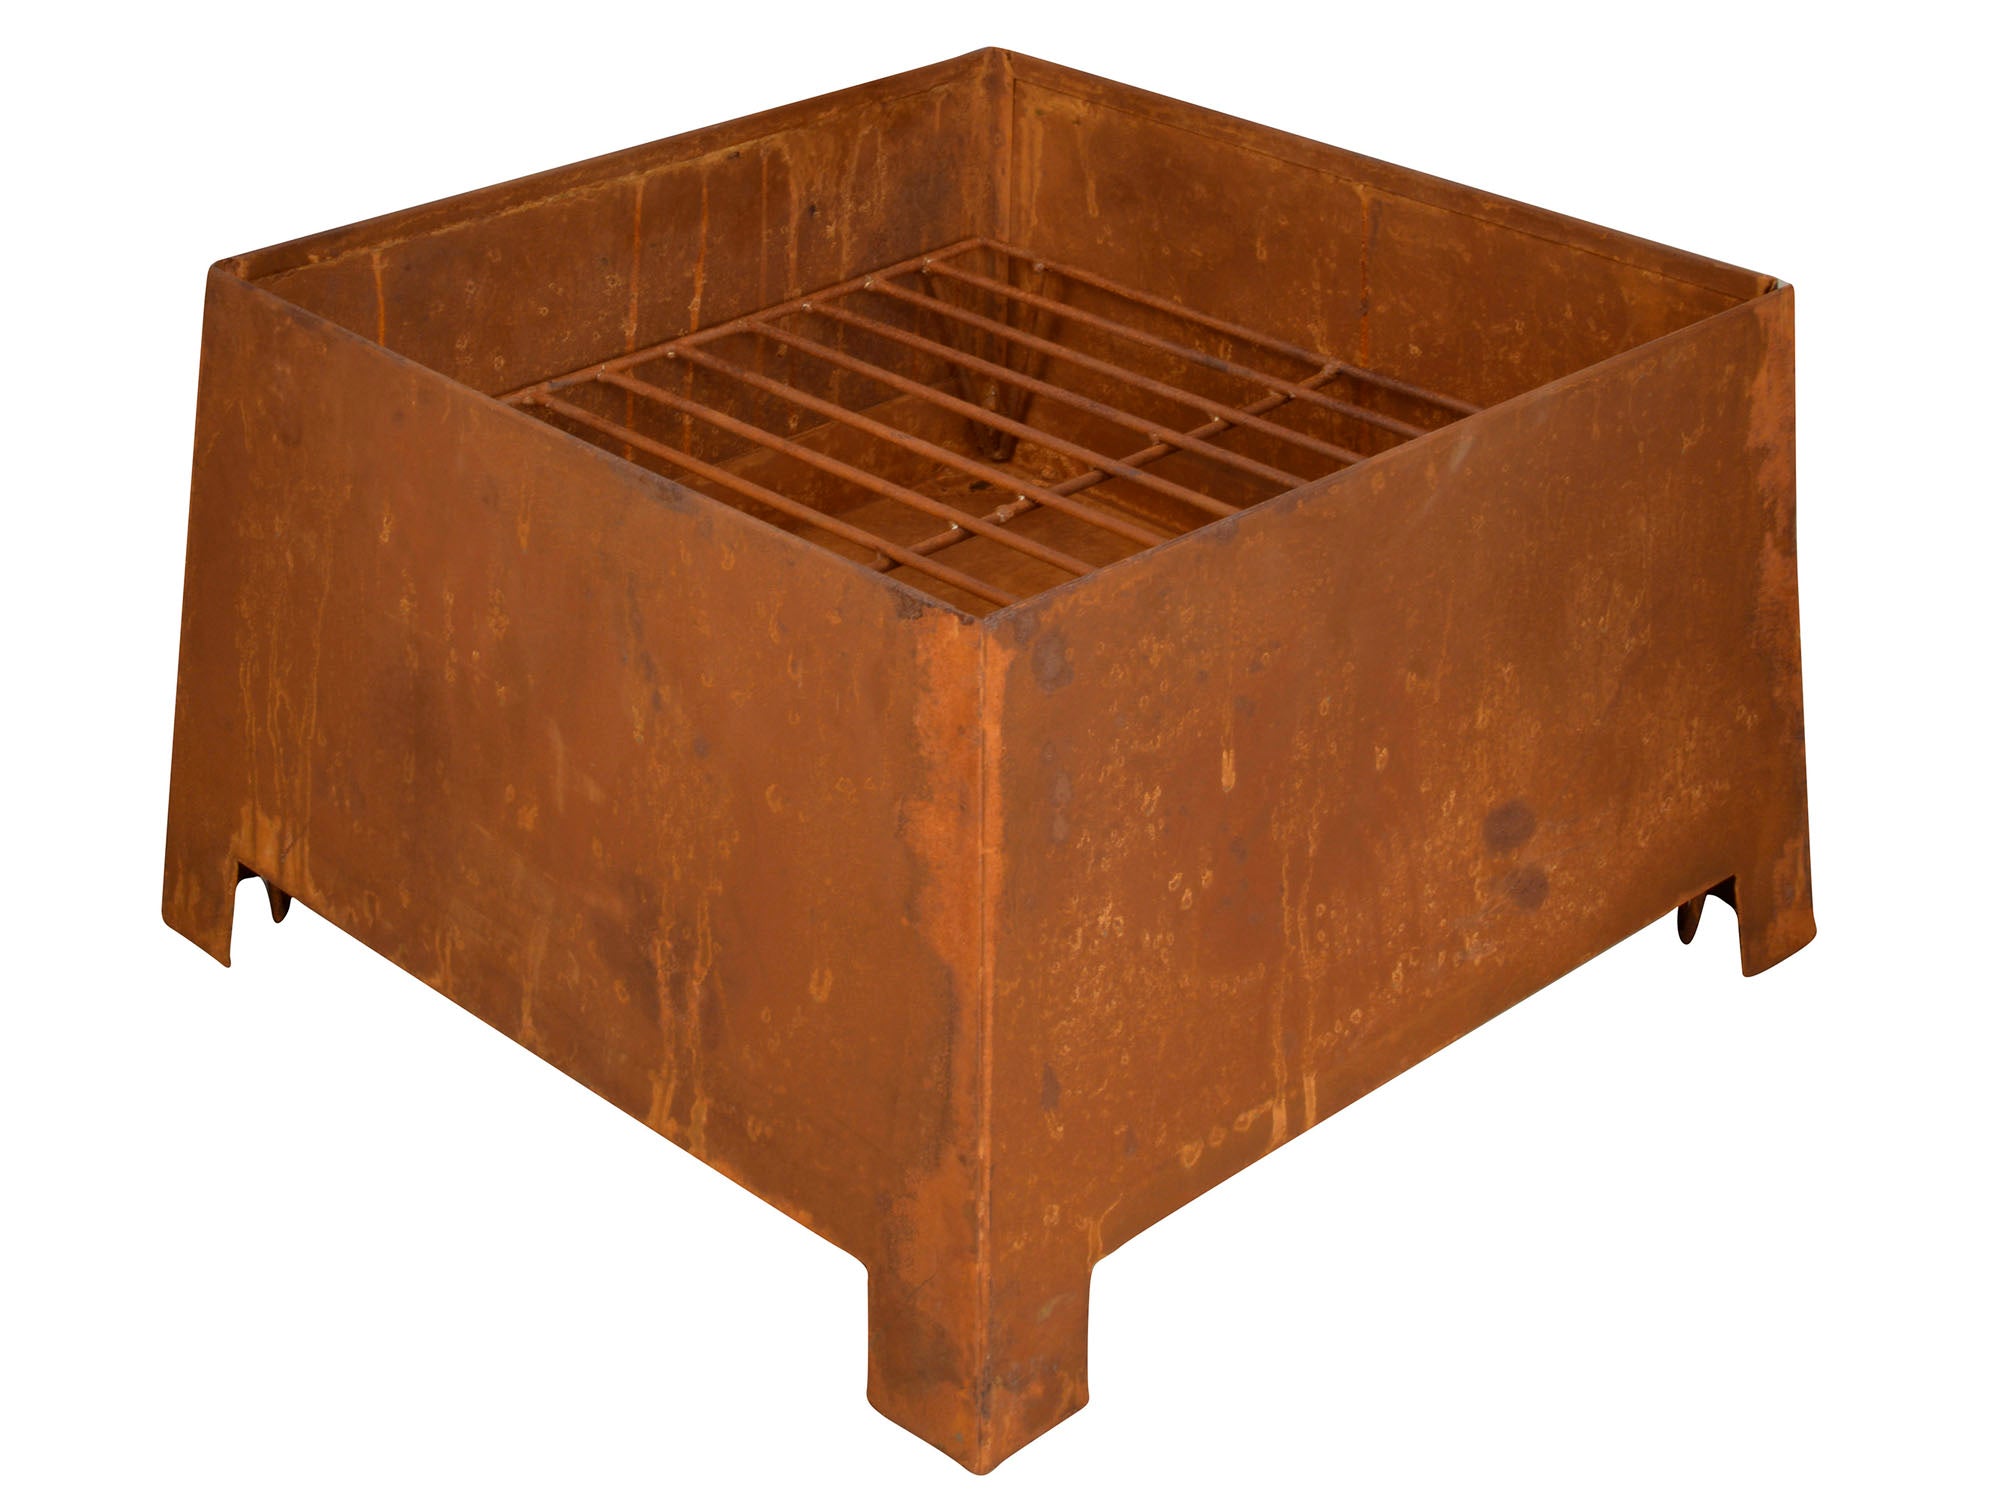 SQUARE RUST EFFECT FIRE PIT WITH GRATE